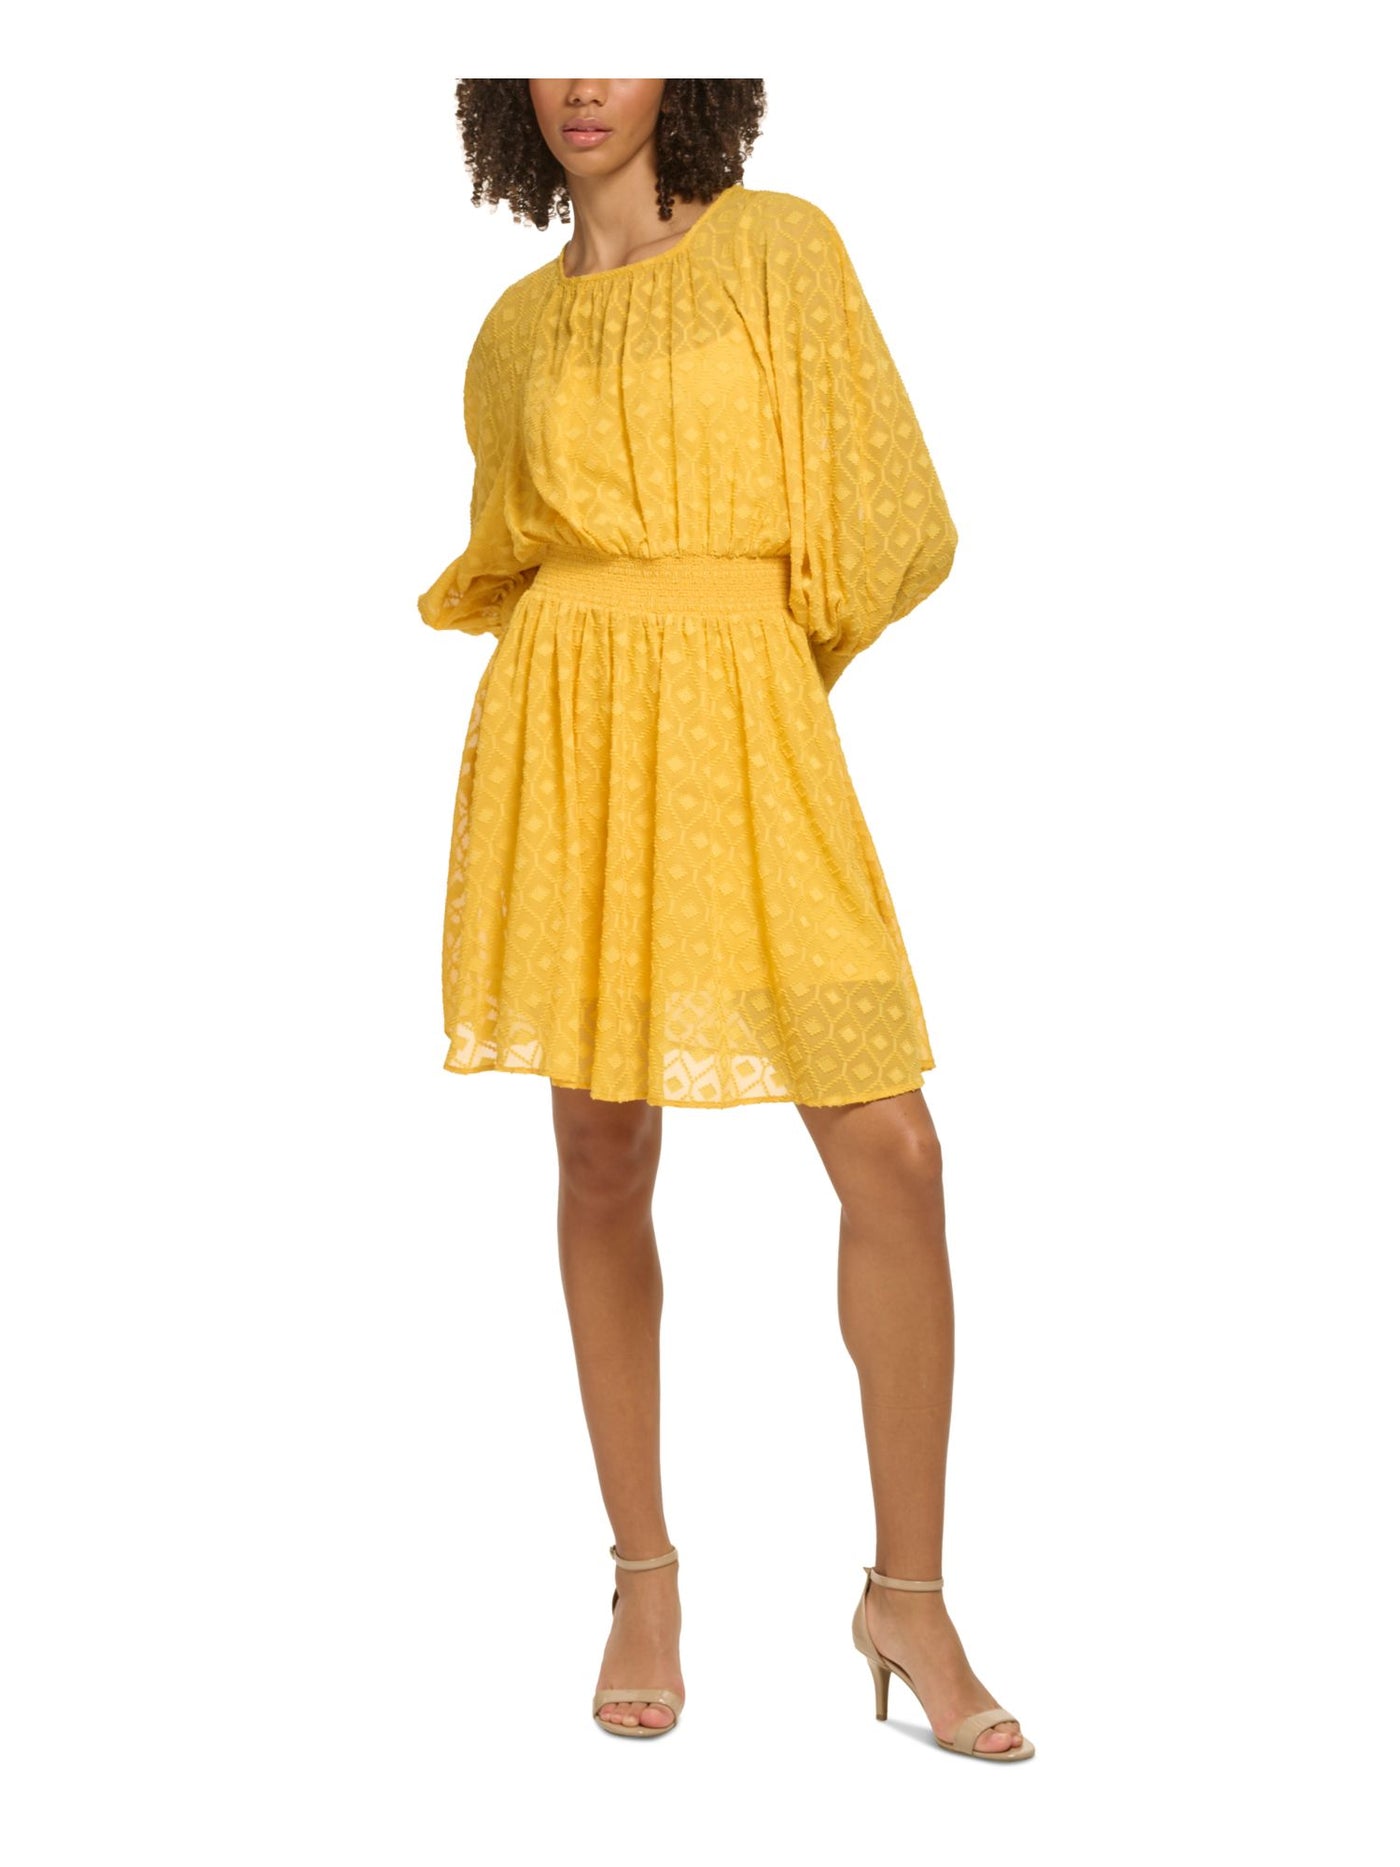 TOMMY HILFIGER Womens Yellow Textured Smocked Keyhole Back Lined Long Sleeve Square Neck Short Blouson Dress 16